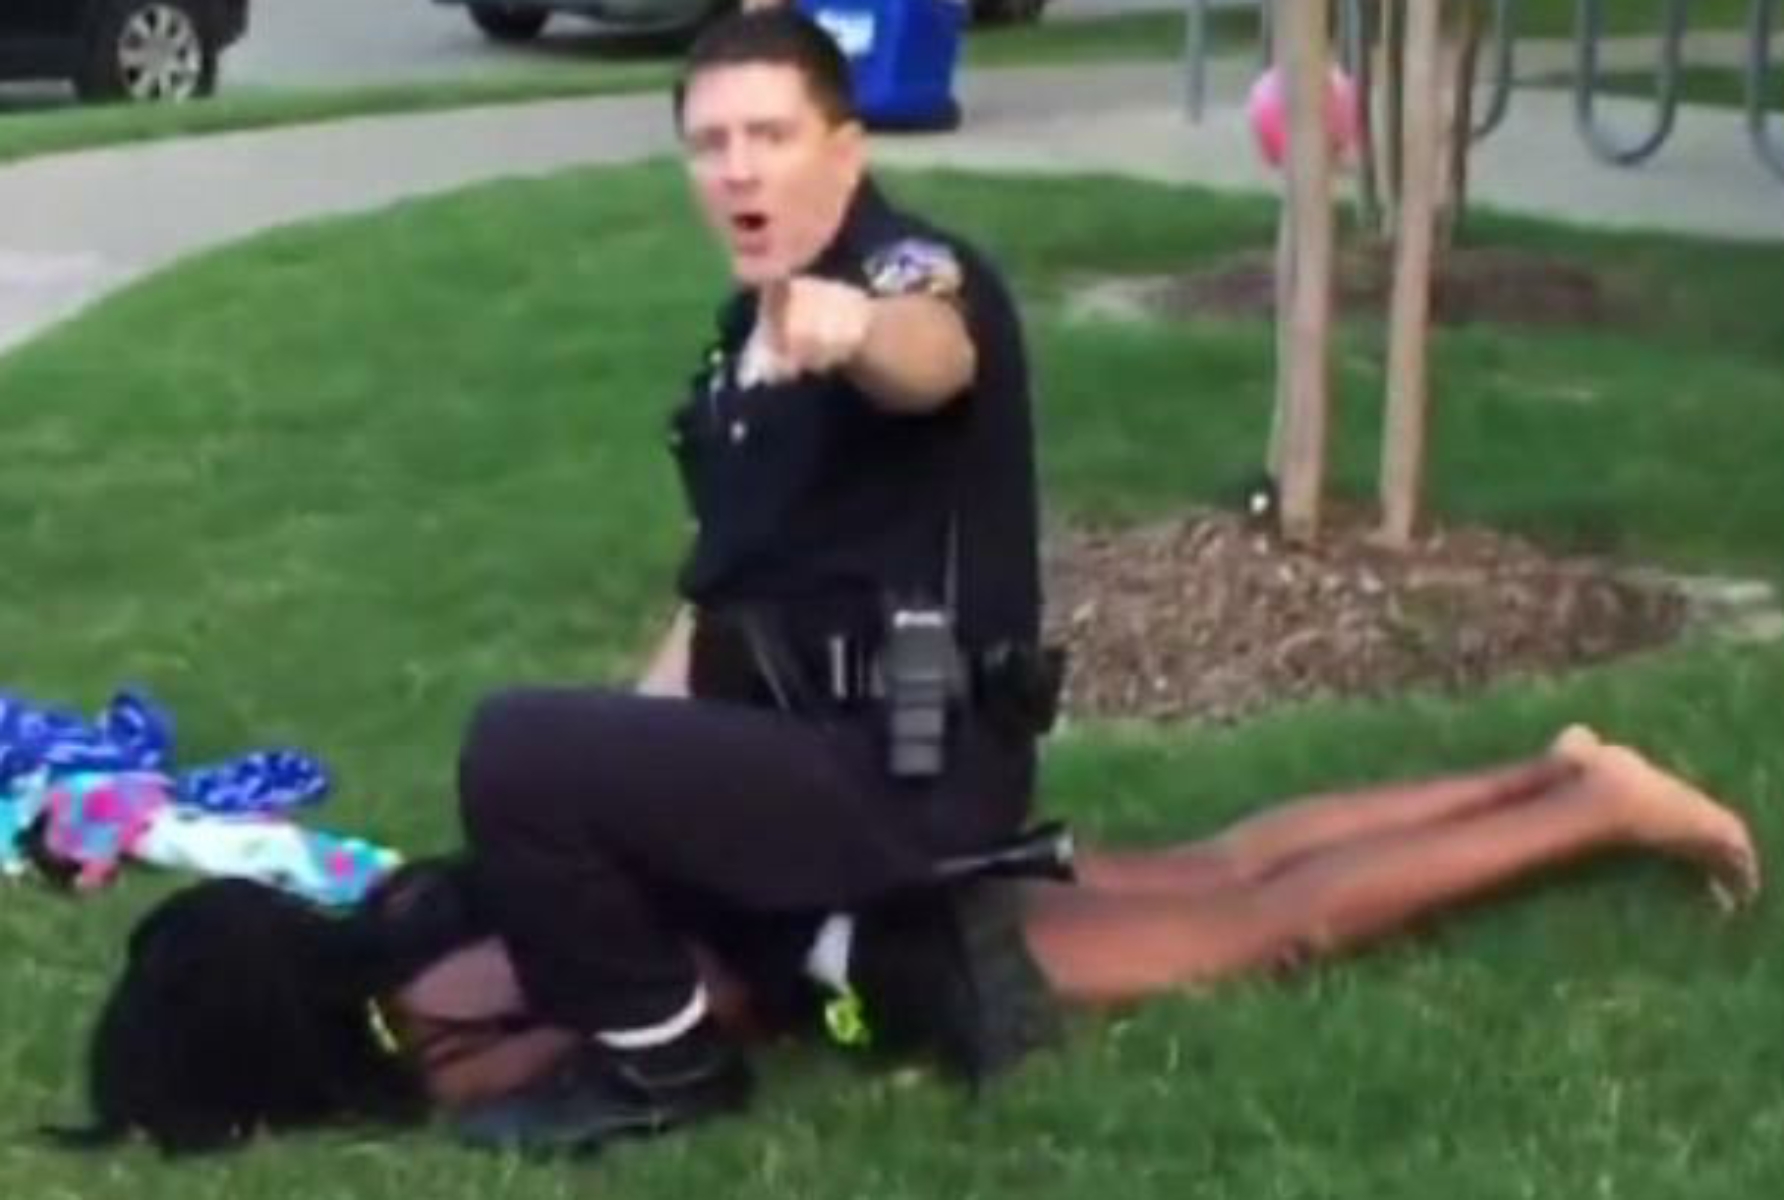 Caught on Cam: Crazy cop pulls gun on black teens, manhandles girl in bikini. He forces her to the ground, and she cries as the officer puts his full weight and both knees in her back. Despicable.